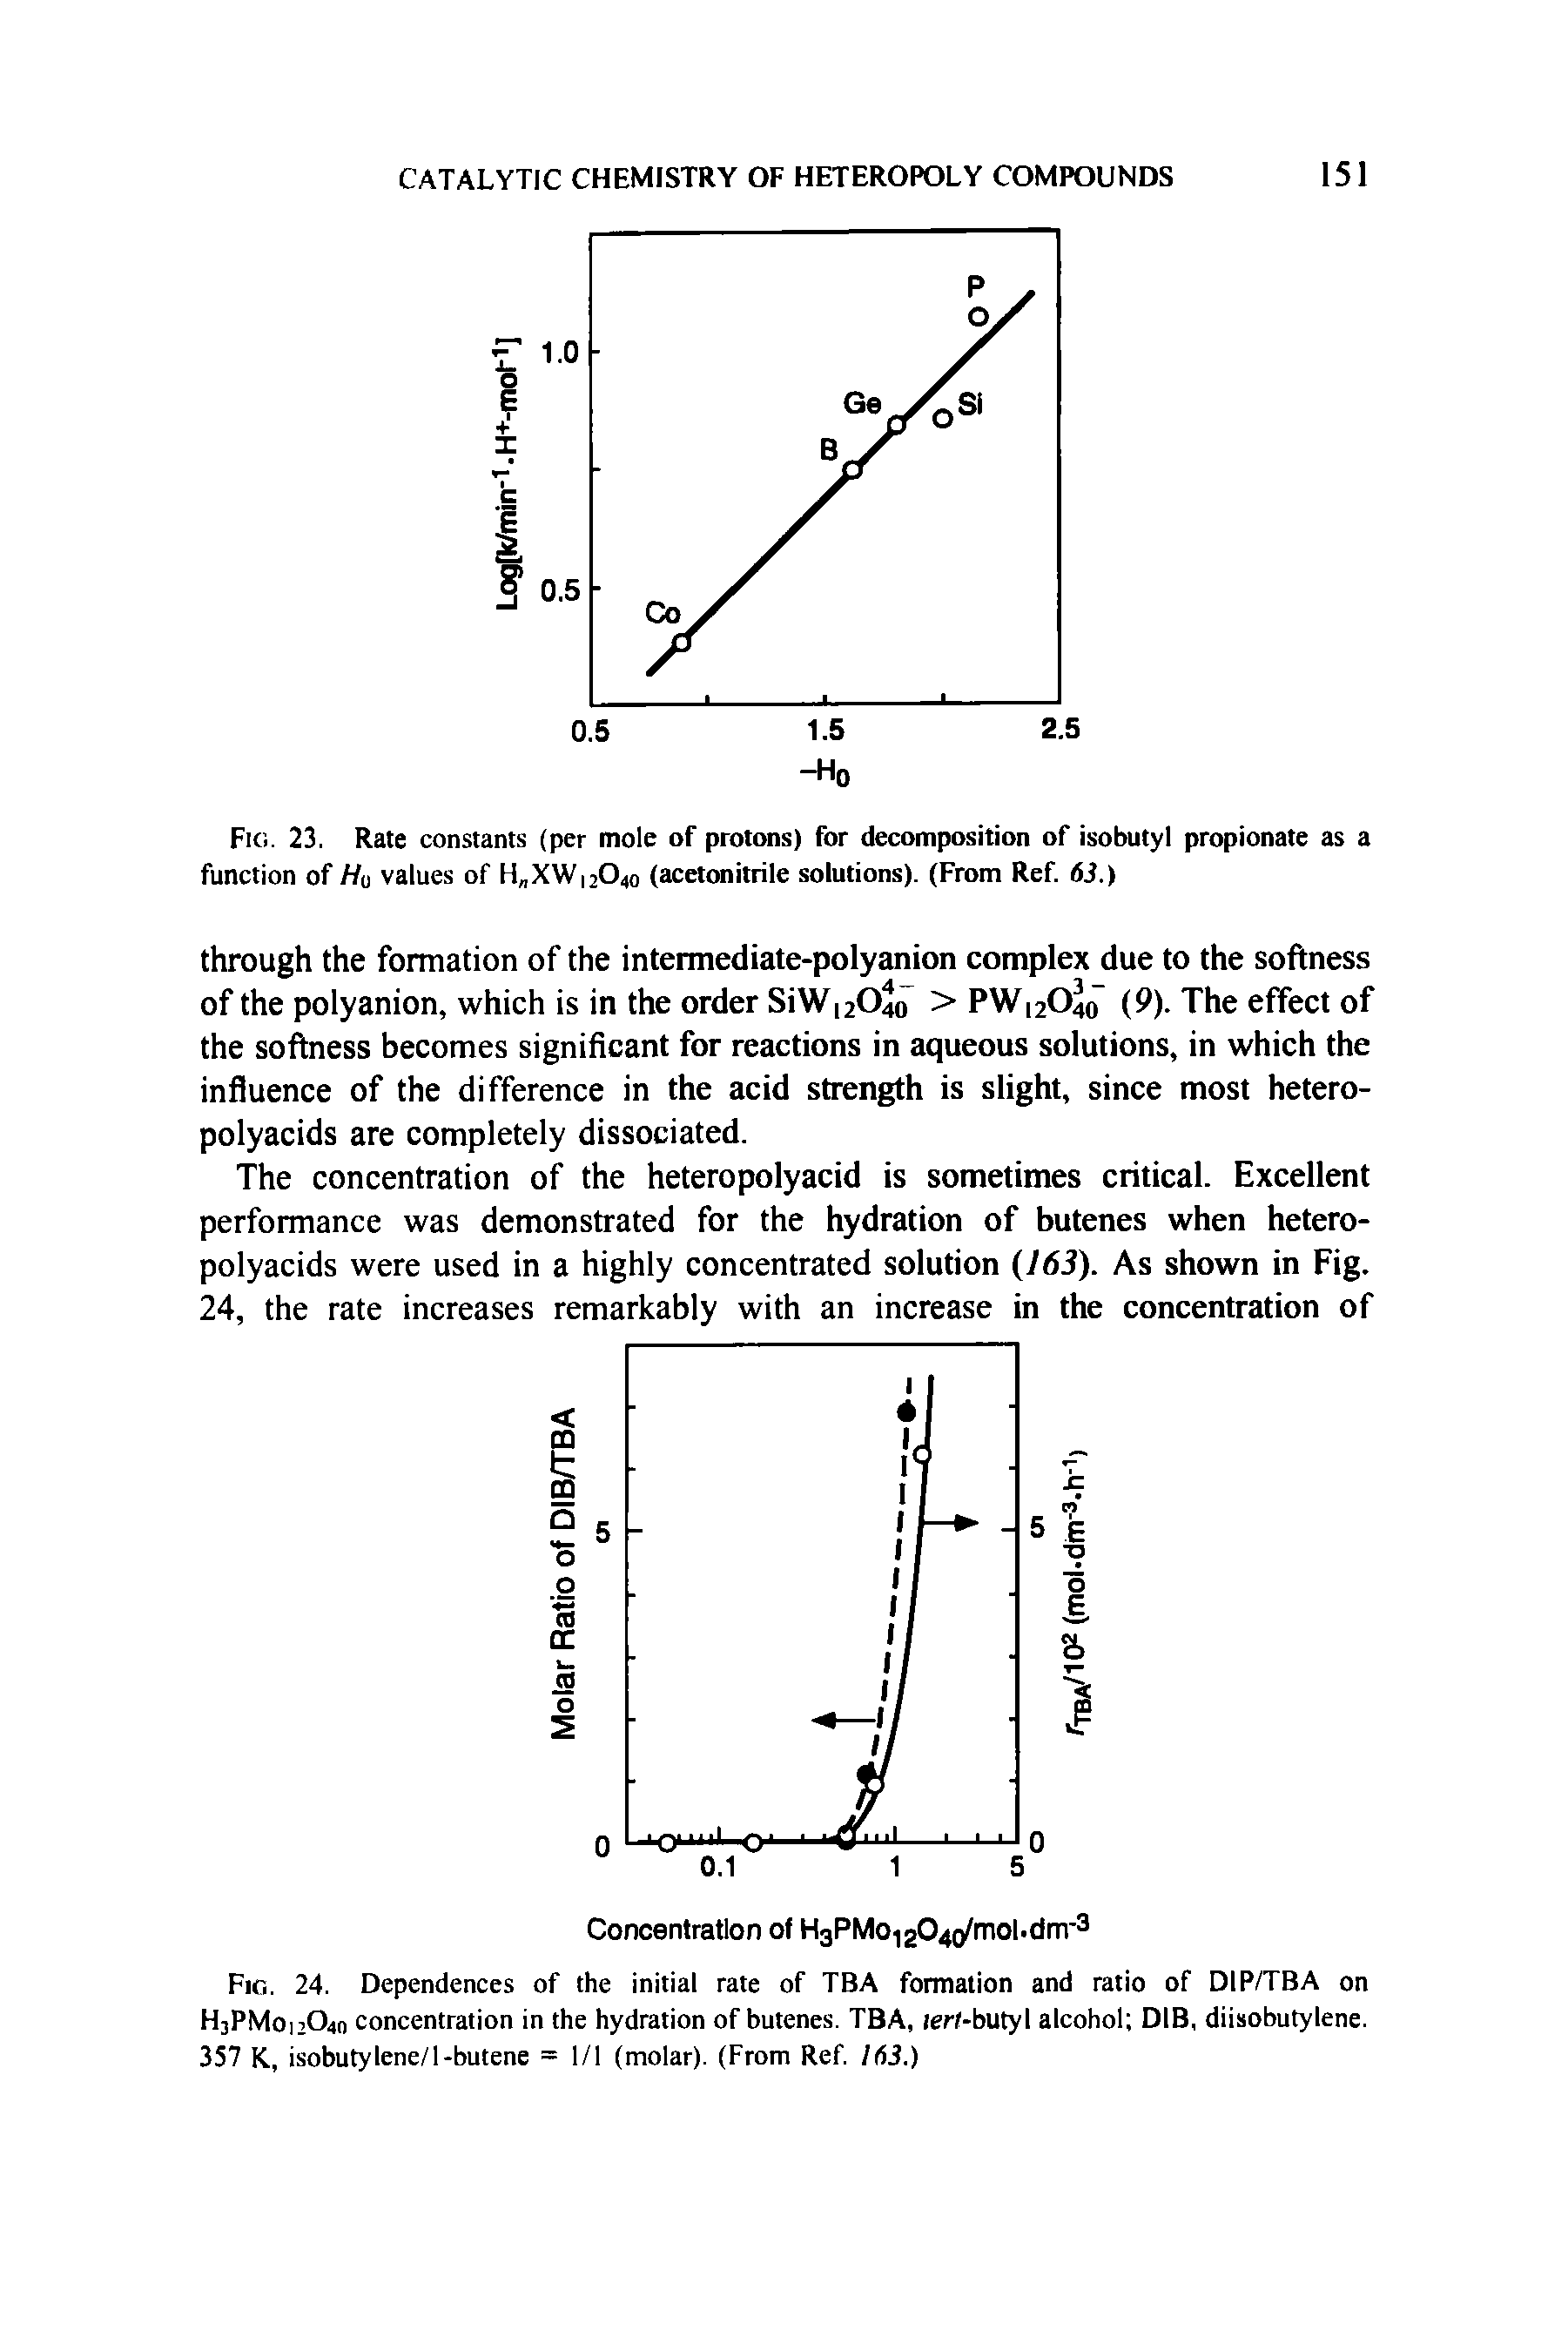 Fig. 24. Dependences of the initial rate of TBA formation and ratio of DIP/TBA on H3PMo,2O40 concentration in the hydration of butenes. TBA, lerl-butyl alcohol DIB, diisobutylene. 357 K, isobutylene/1-butene = 1/1 (molar). (From Ref. 163.)...